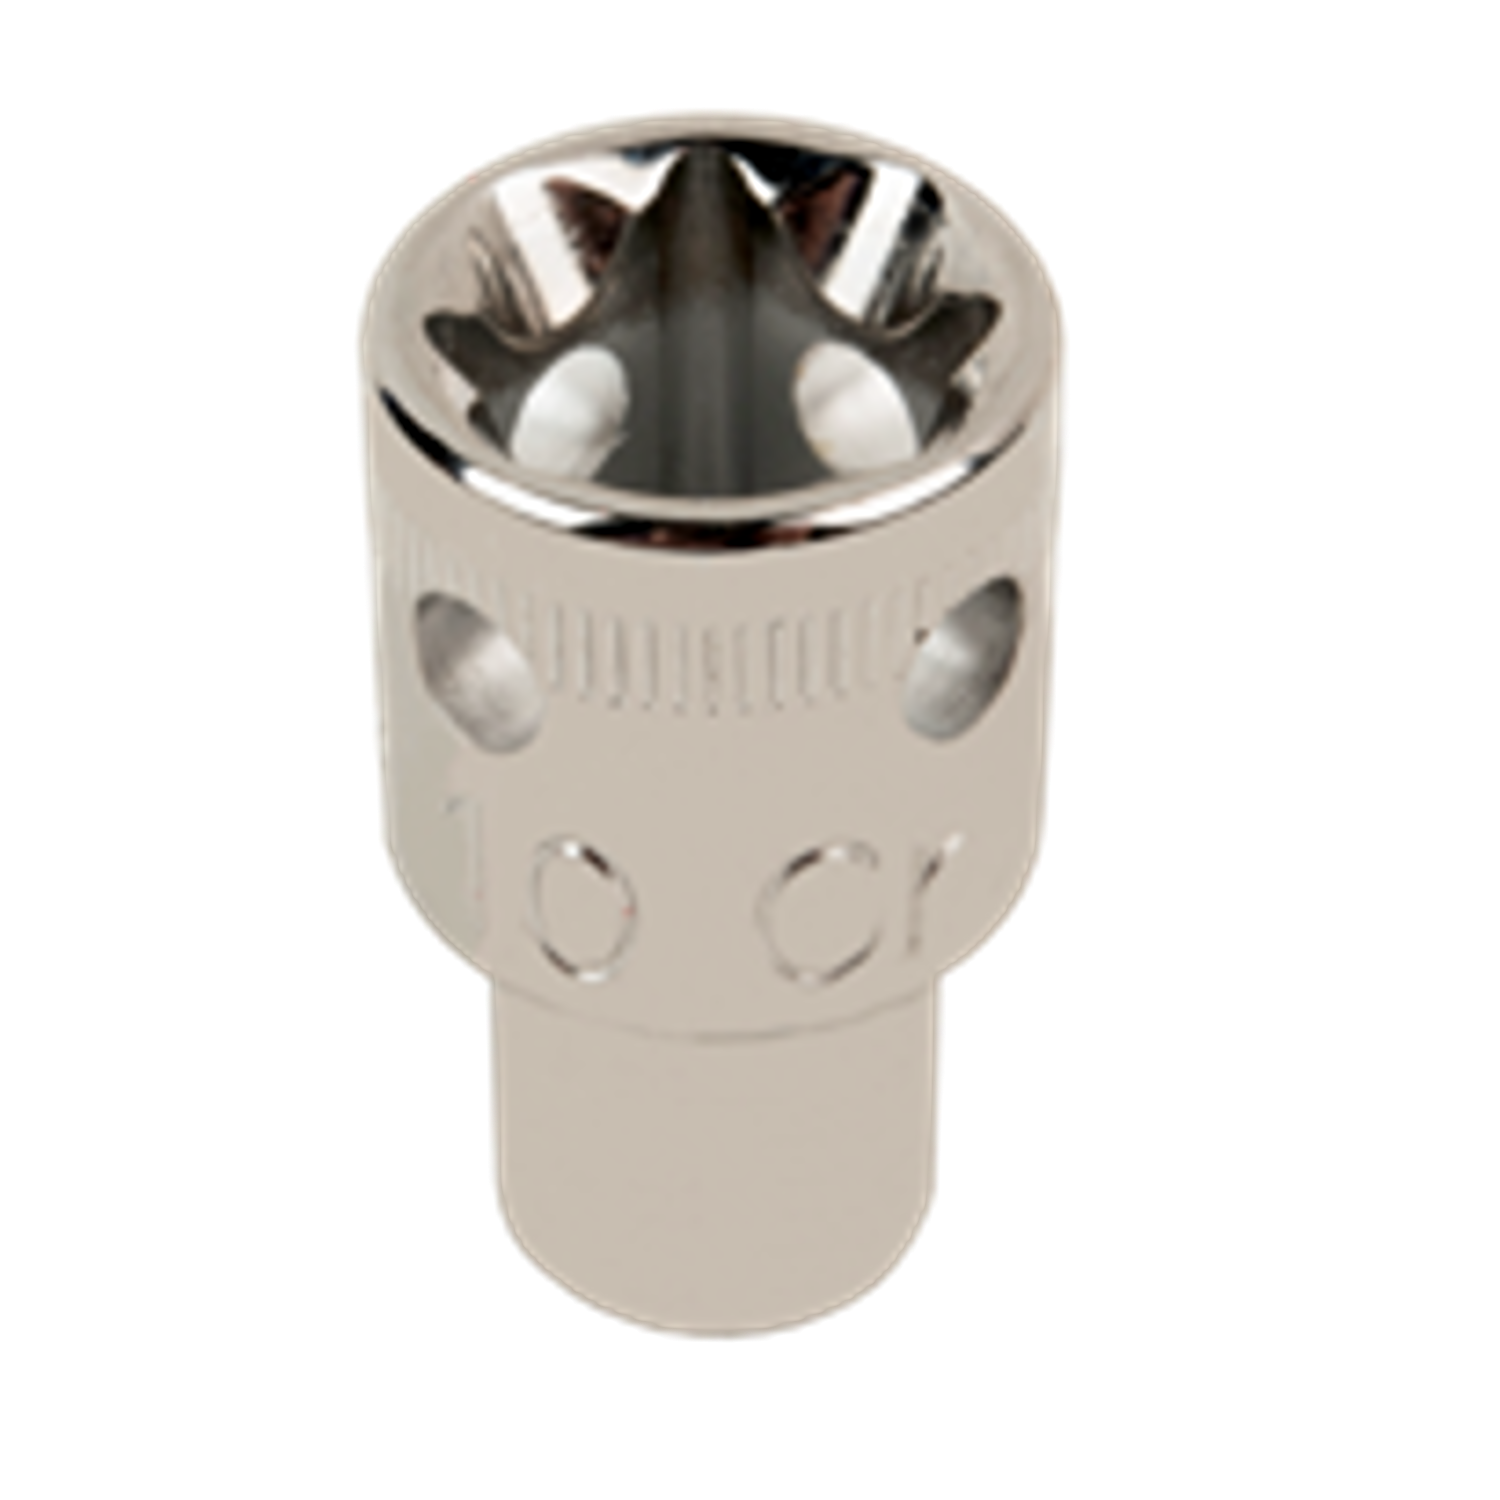 BAHCO TAH16B” 1/2” Square Drive Socket with Imperial Bi-hex - Premium 1/2” Square Drive Socket from BAHCO - Shop now at Yew Aik.